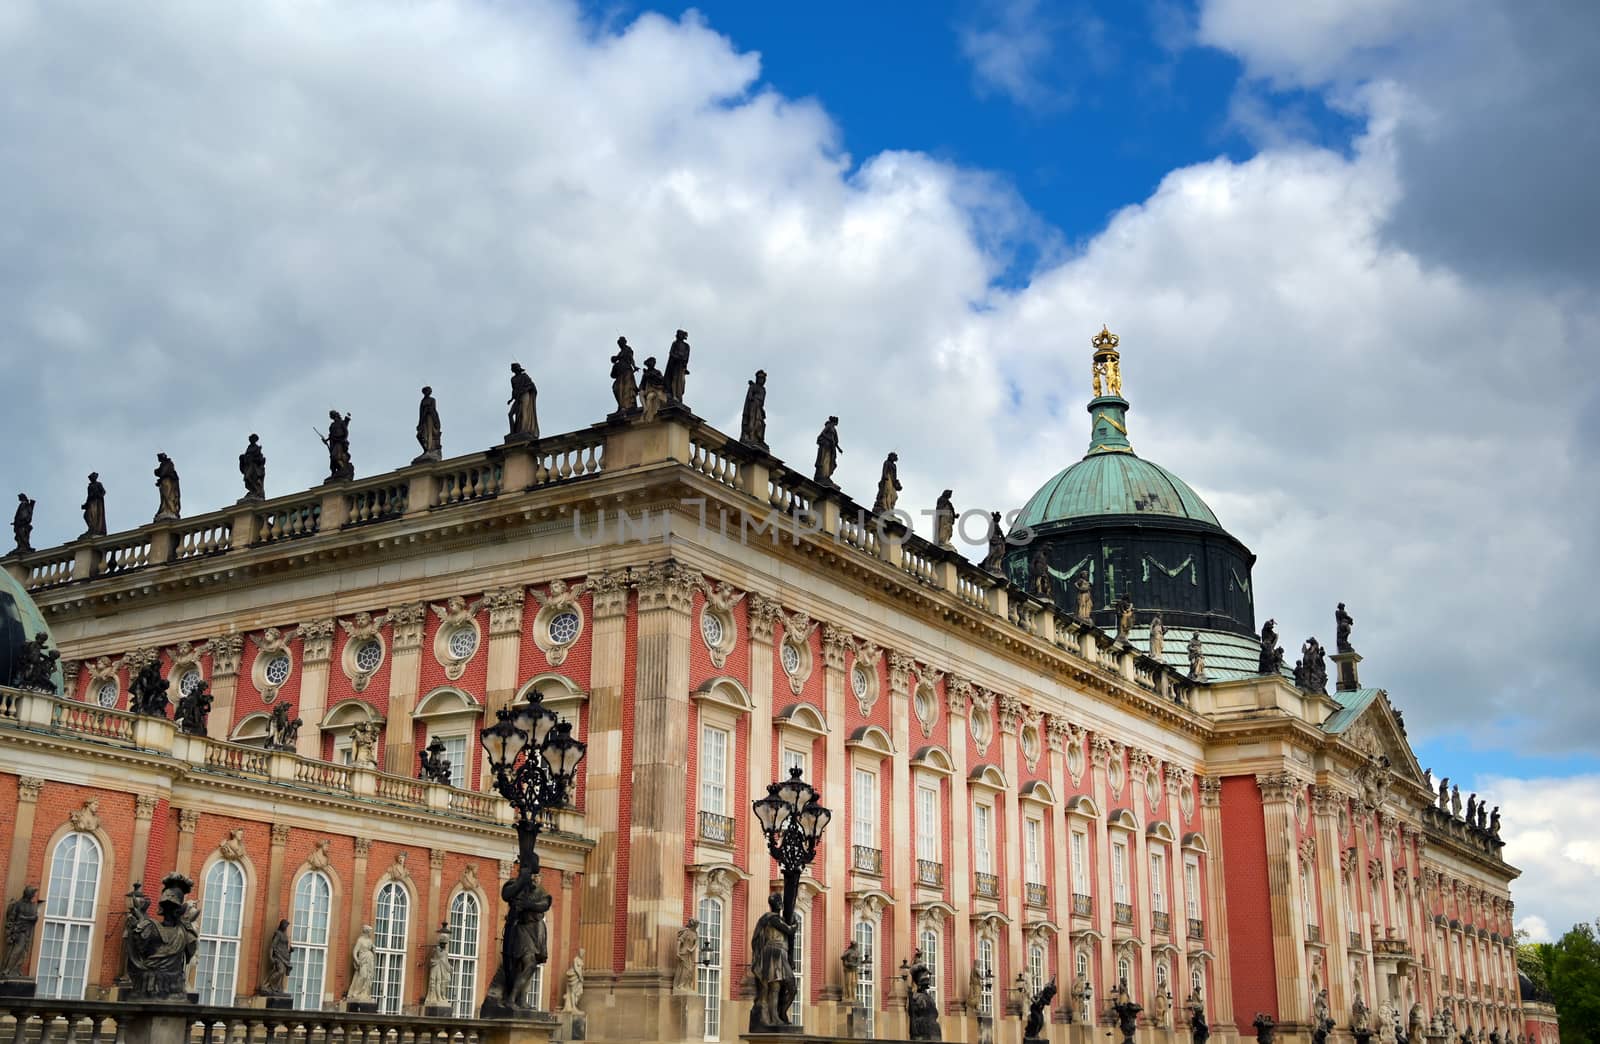 The New Palace in Potsdam, Germany by jbyard22